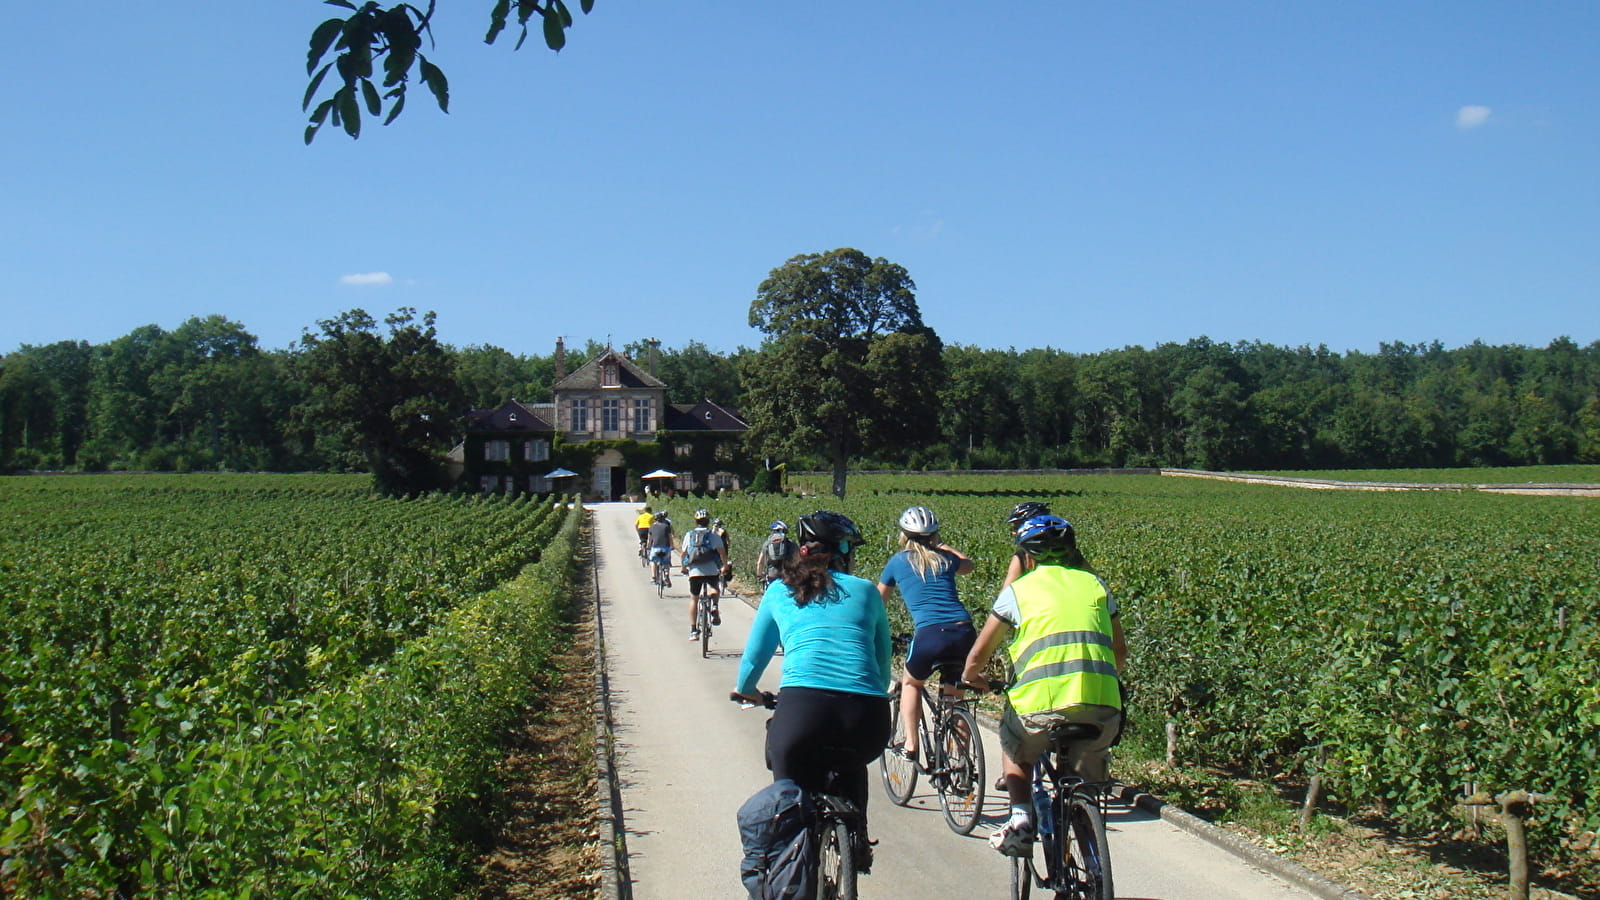 Bourgogne Evasion by Active Tours